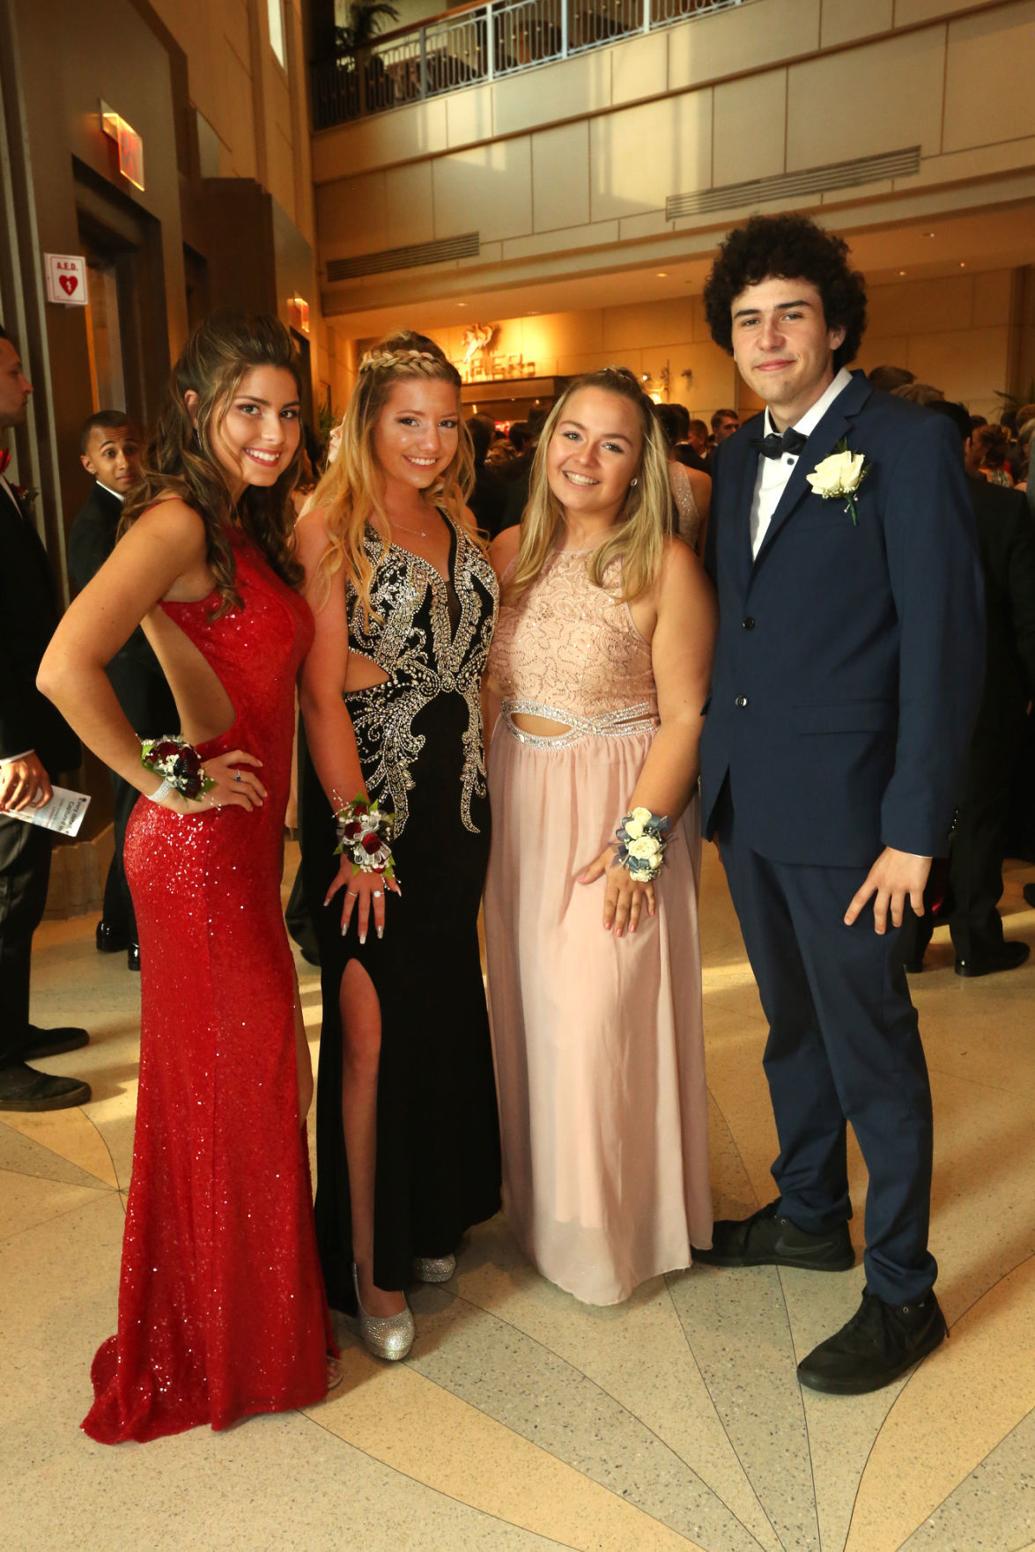 PHOTOS from Southern Regional High School 2019 prom